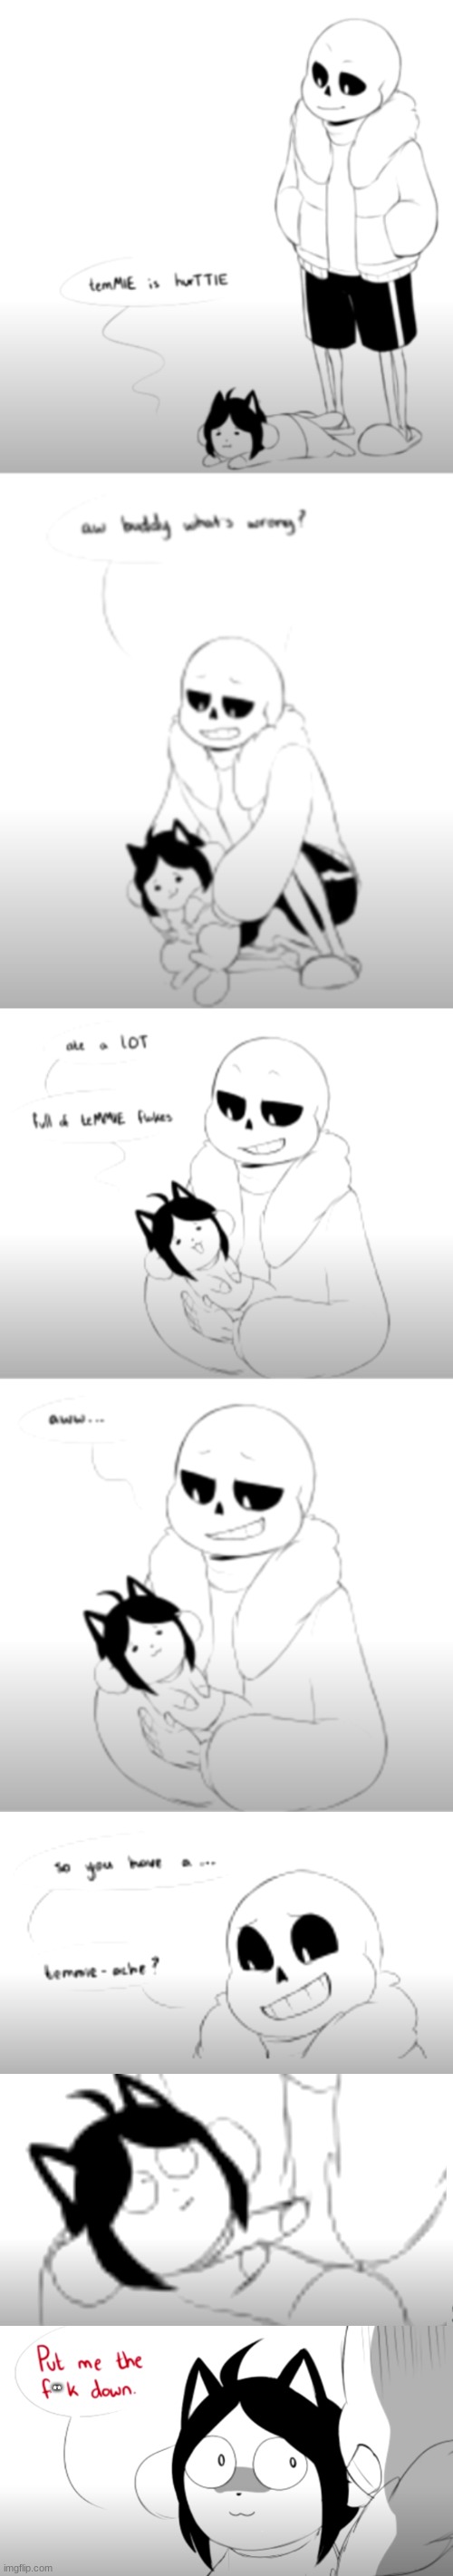 This is one of the best comics EVER! | ** | image tagged in temmie,sans,comics | made w/ Imgflip meme maker